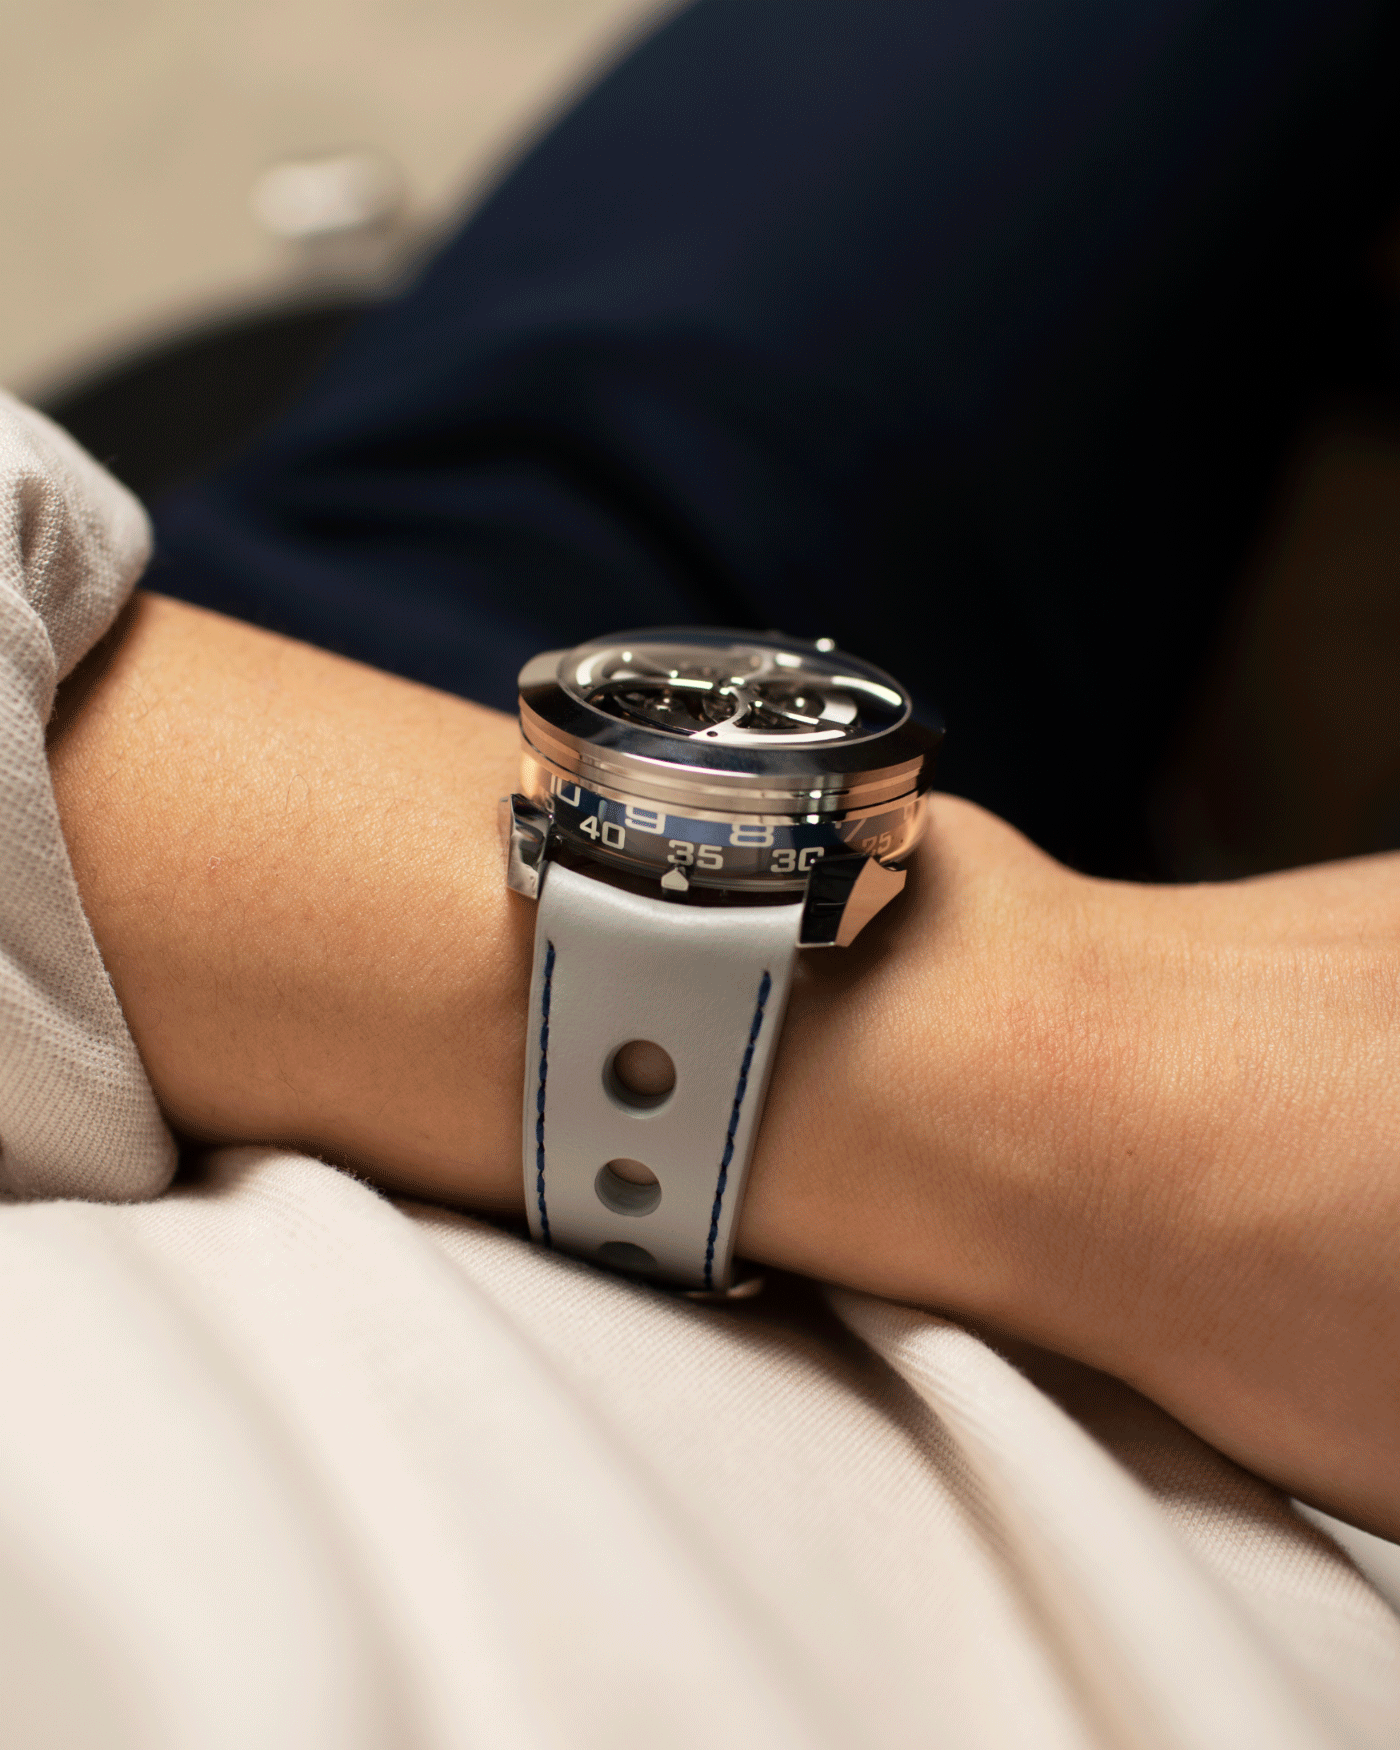 Brand: MB&F Year: 2021 Model: MAD 1 Material: Stainless Steel and Titanium Movement: Miyota Cal 821A Case Diameter: 42mm Bracelet/Strap: MB&F White Grey Leather Rally Strap and Stainless Steel Deployant 